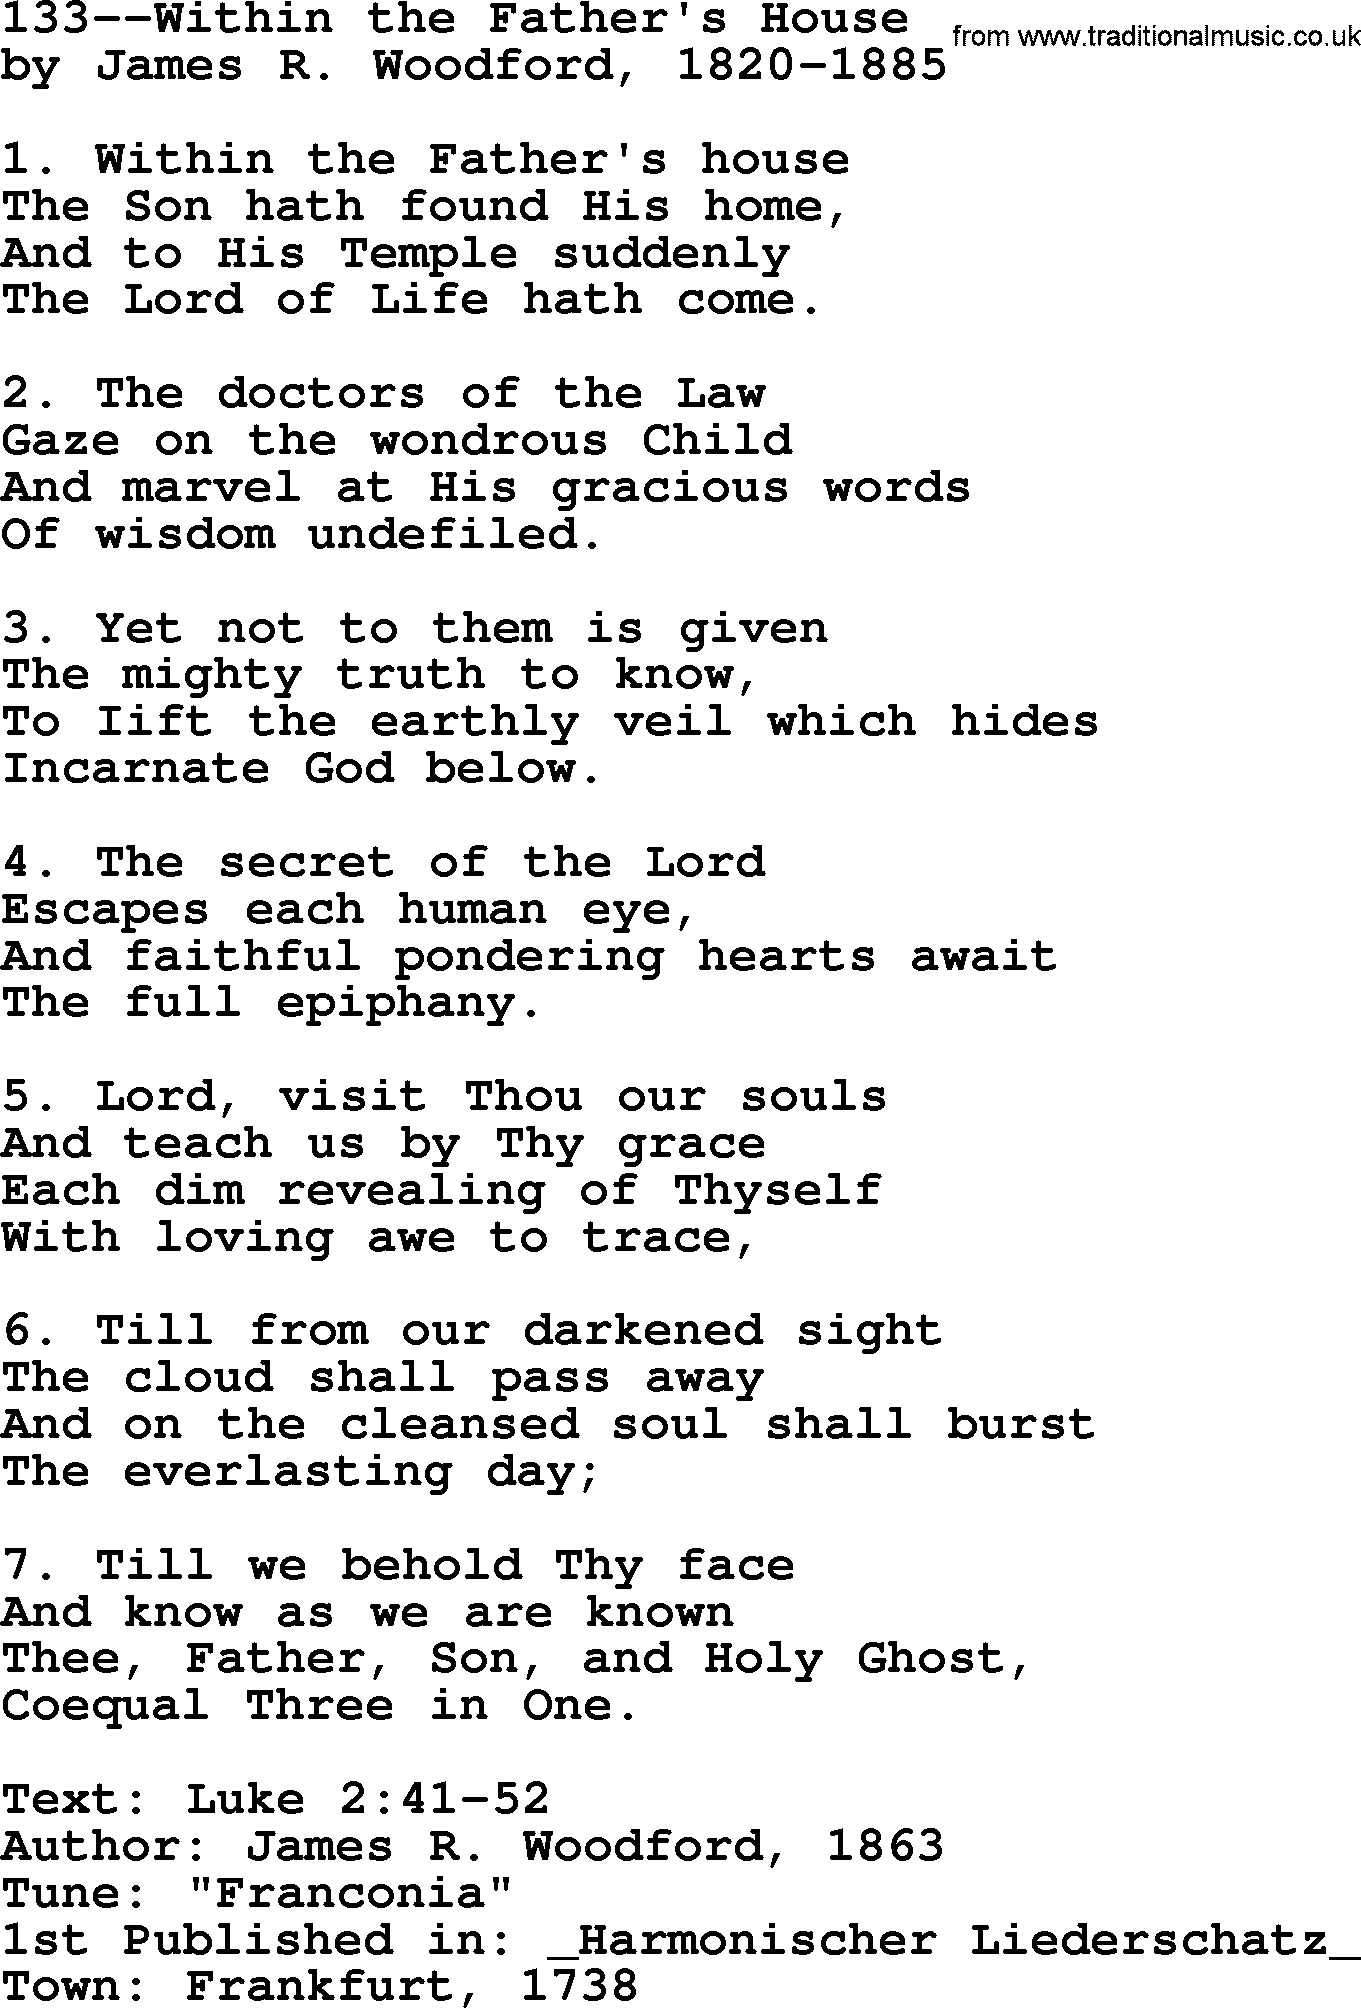 Lutheran Hymn: 133--Within the Father's House.txt lyrics with PDF